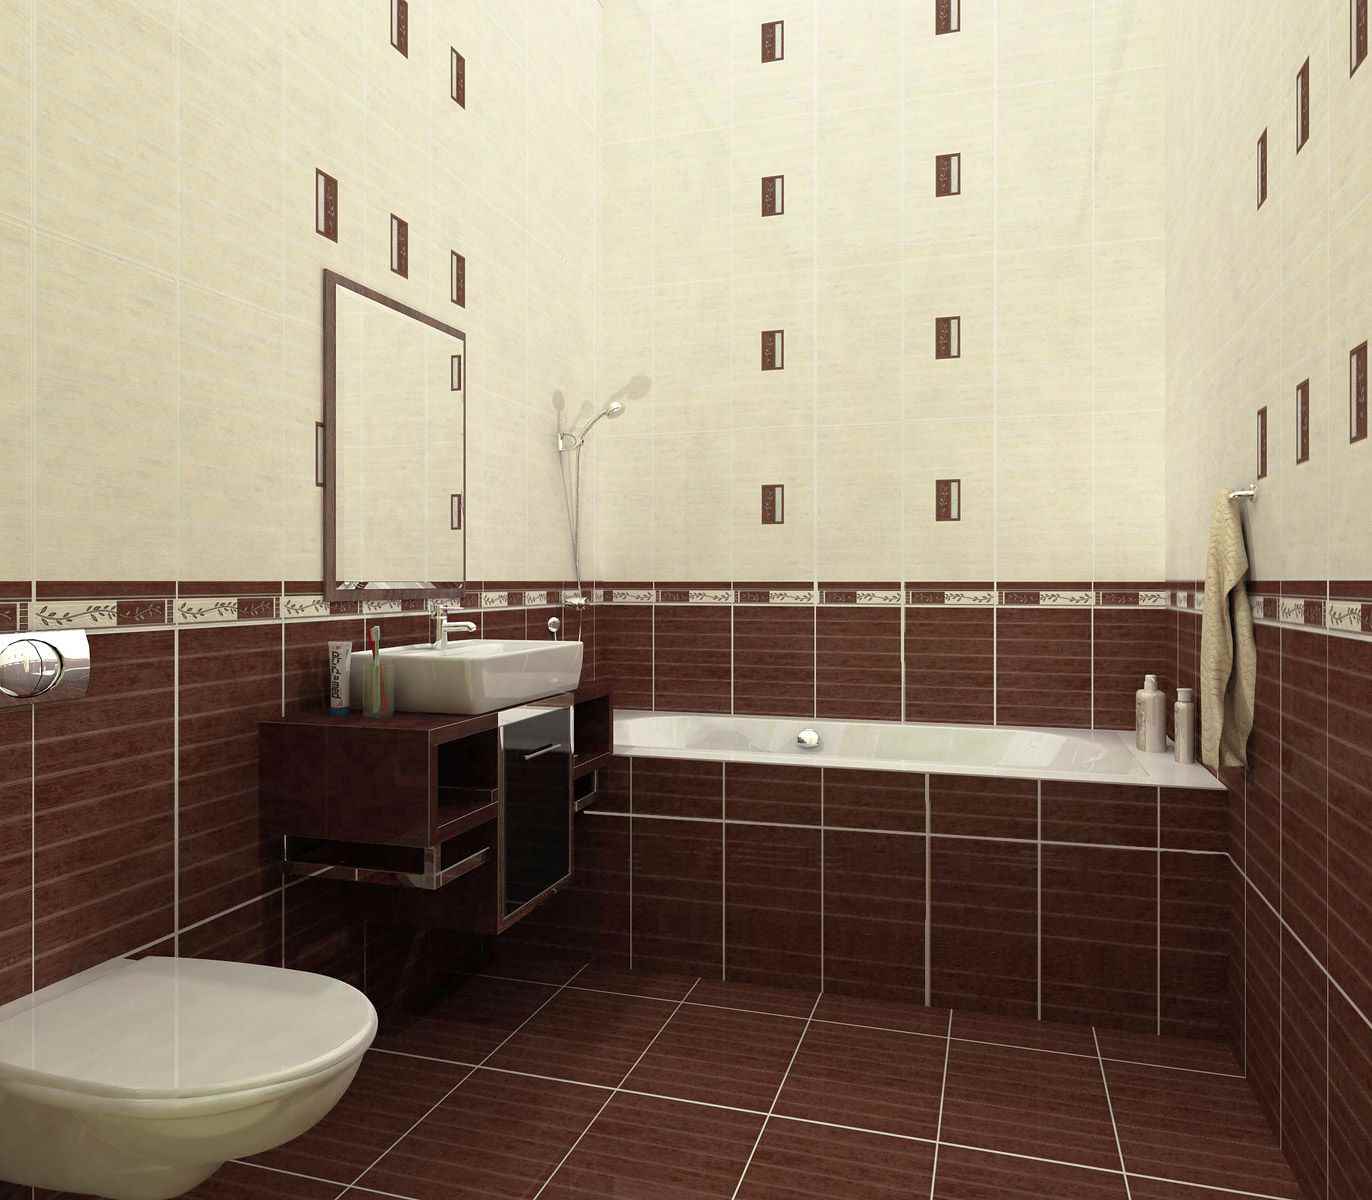 version of the beautiful style of laying tiles in the bathroom